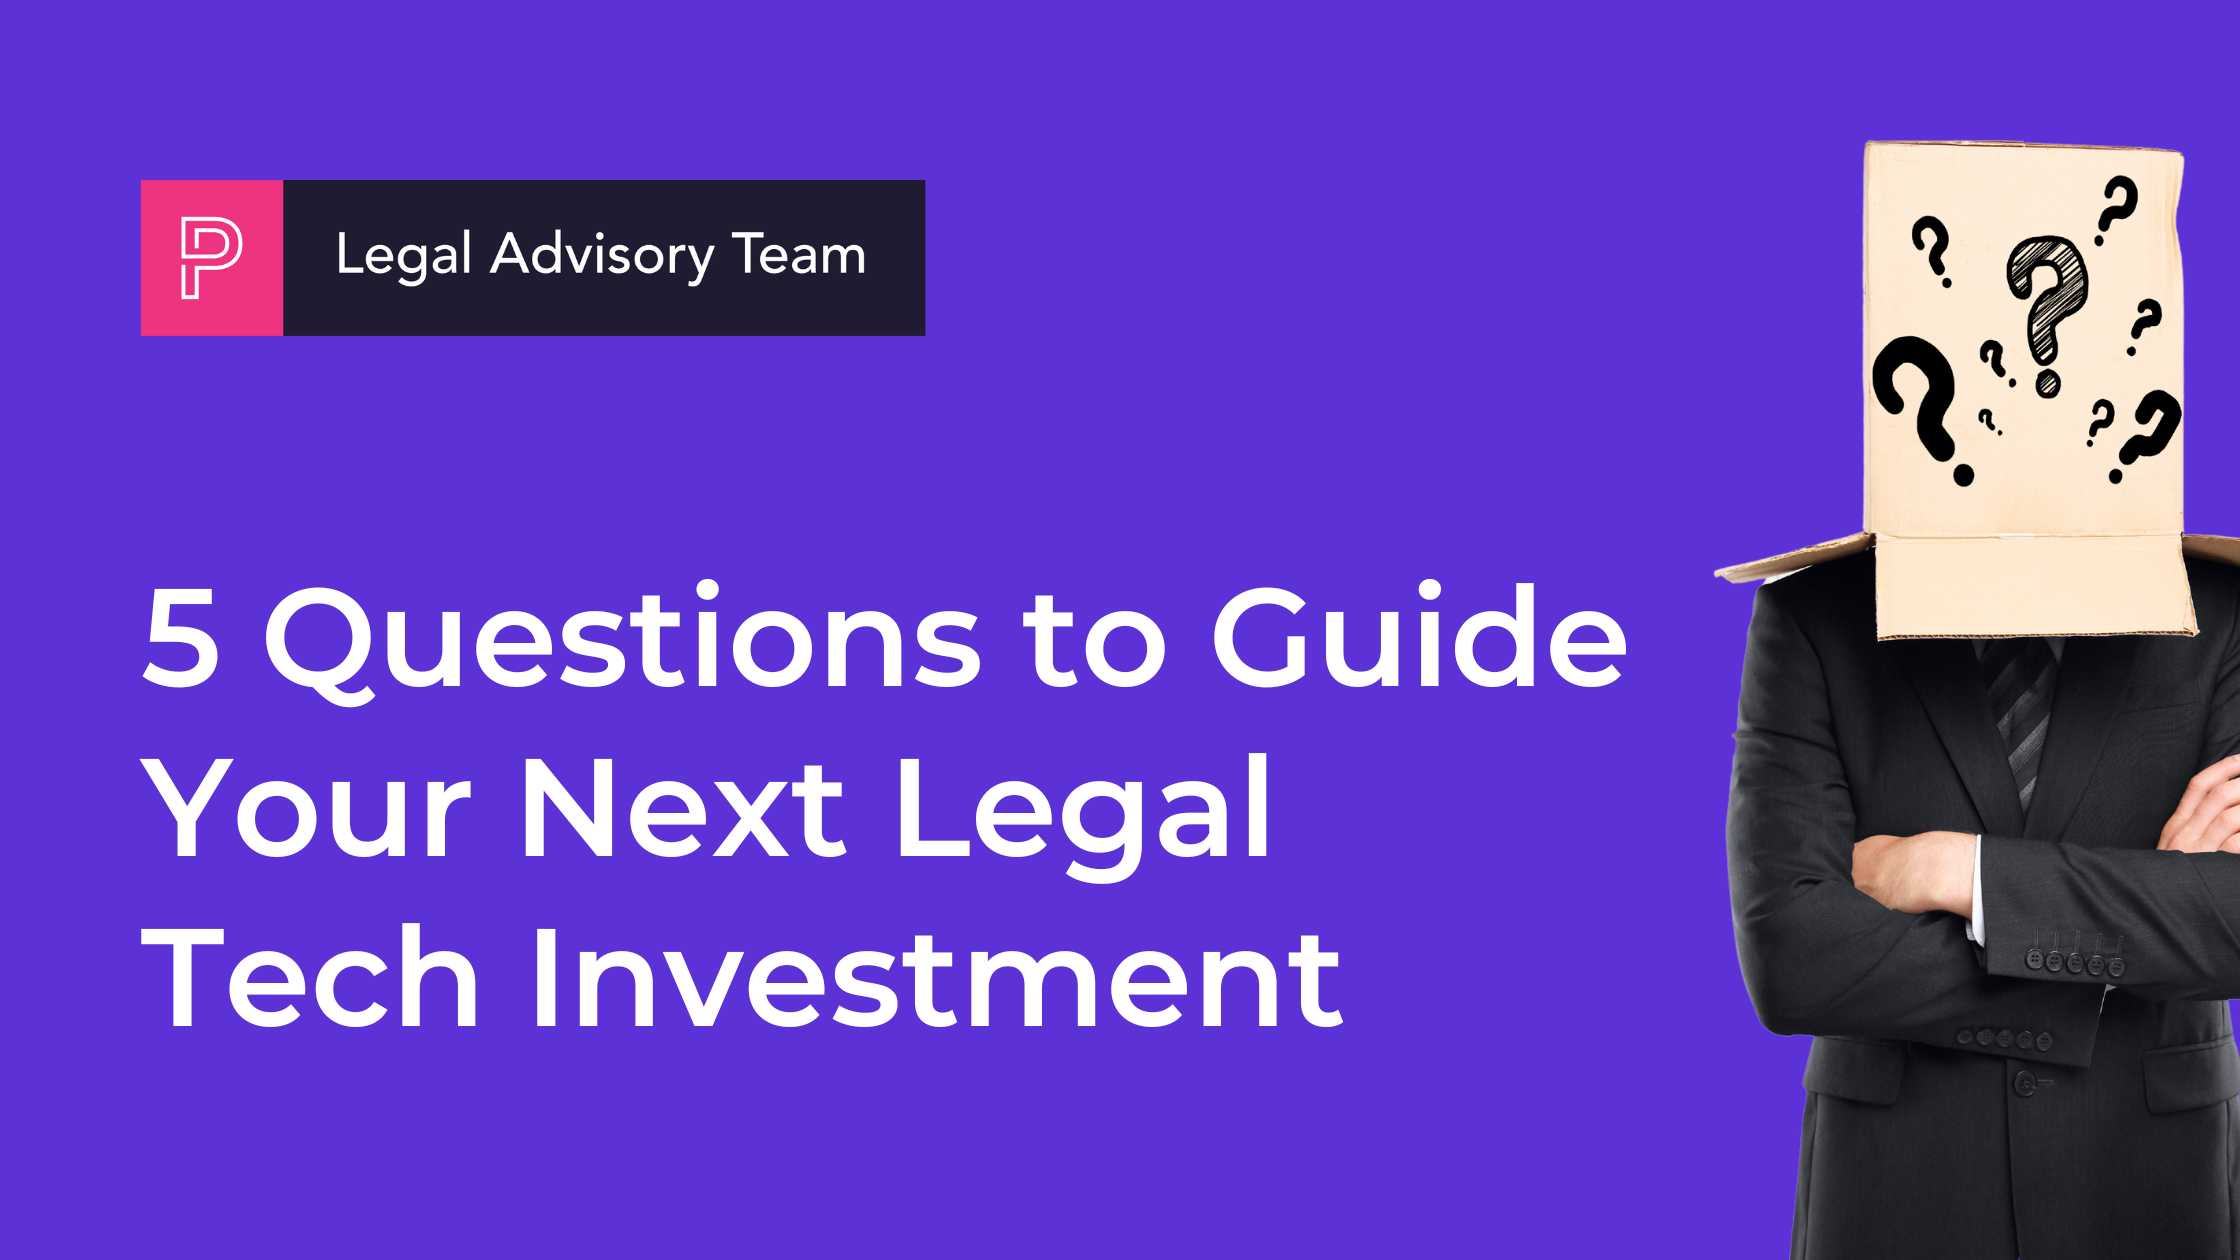 5 Questions to Guide Your In-house Team's Next Legal Tech Investment